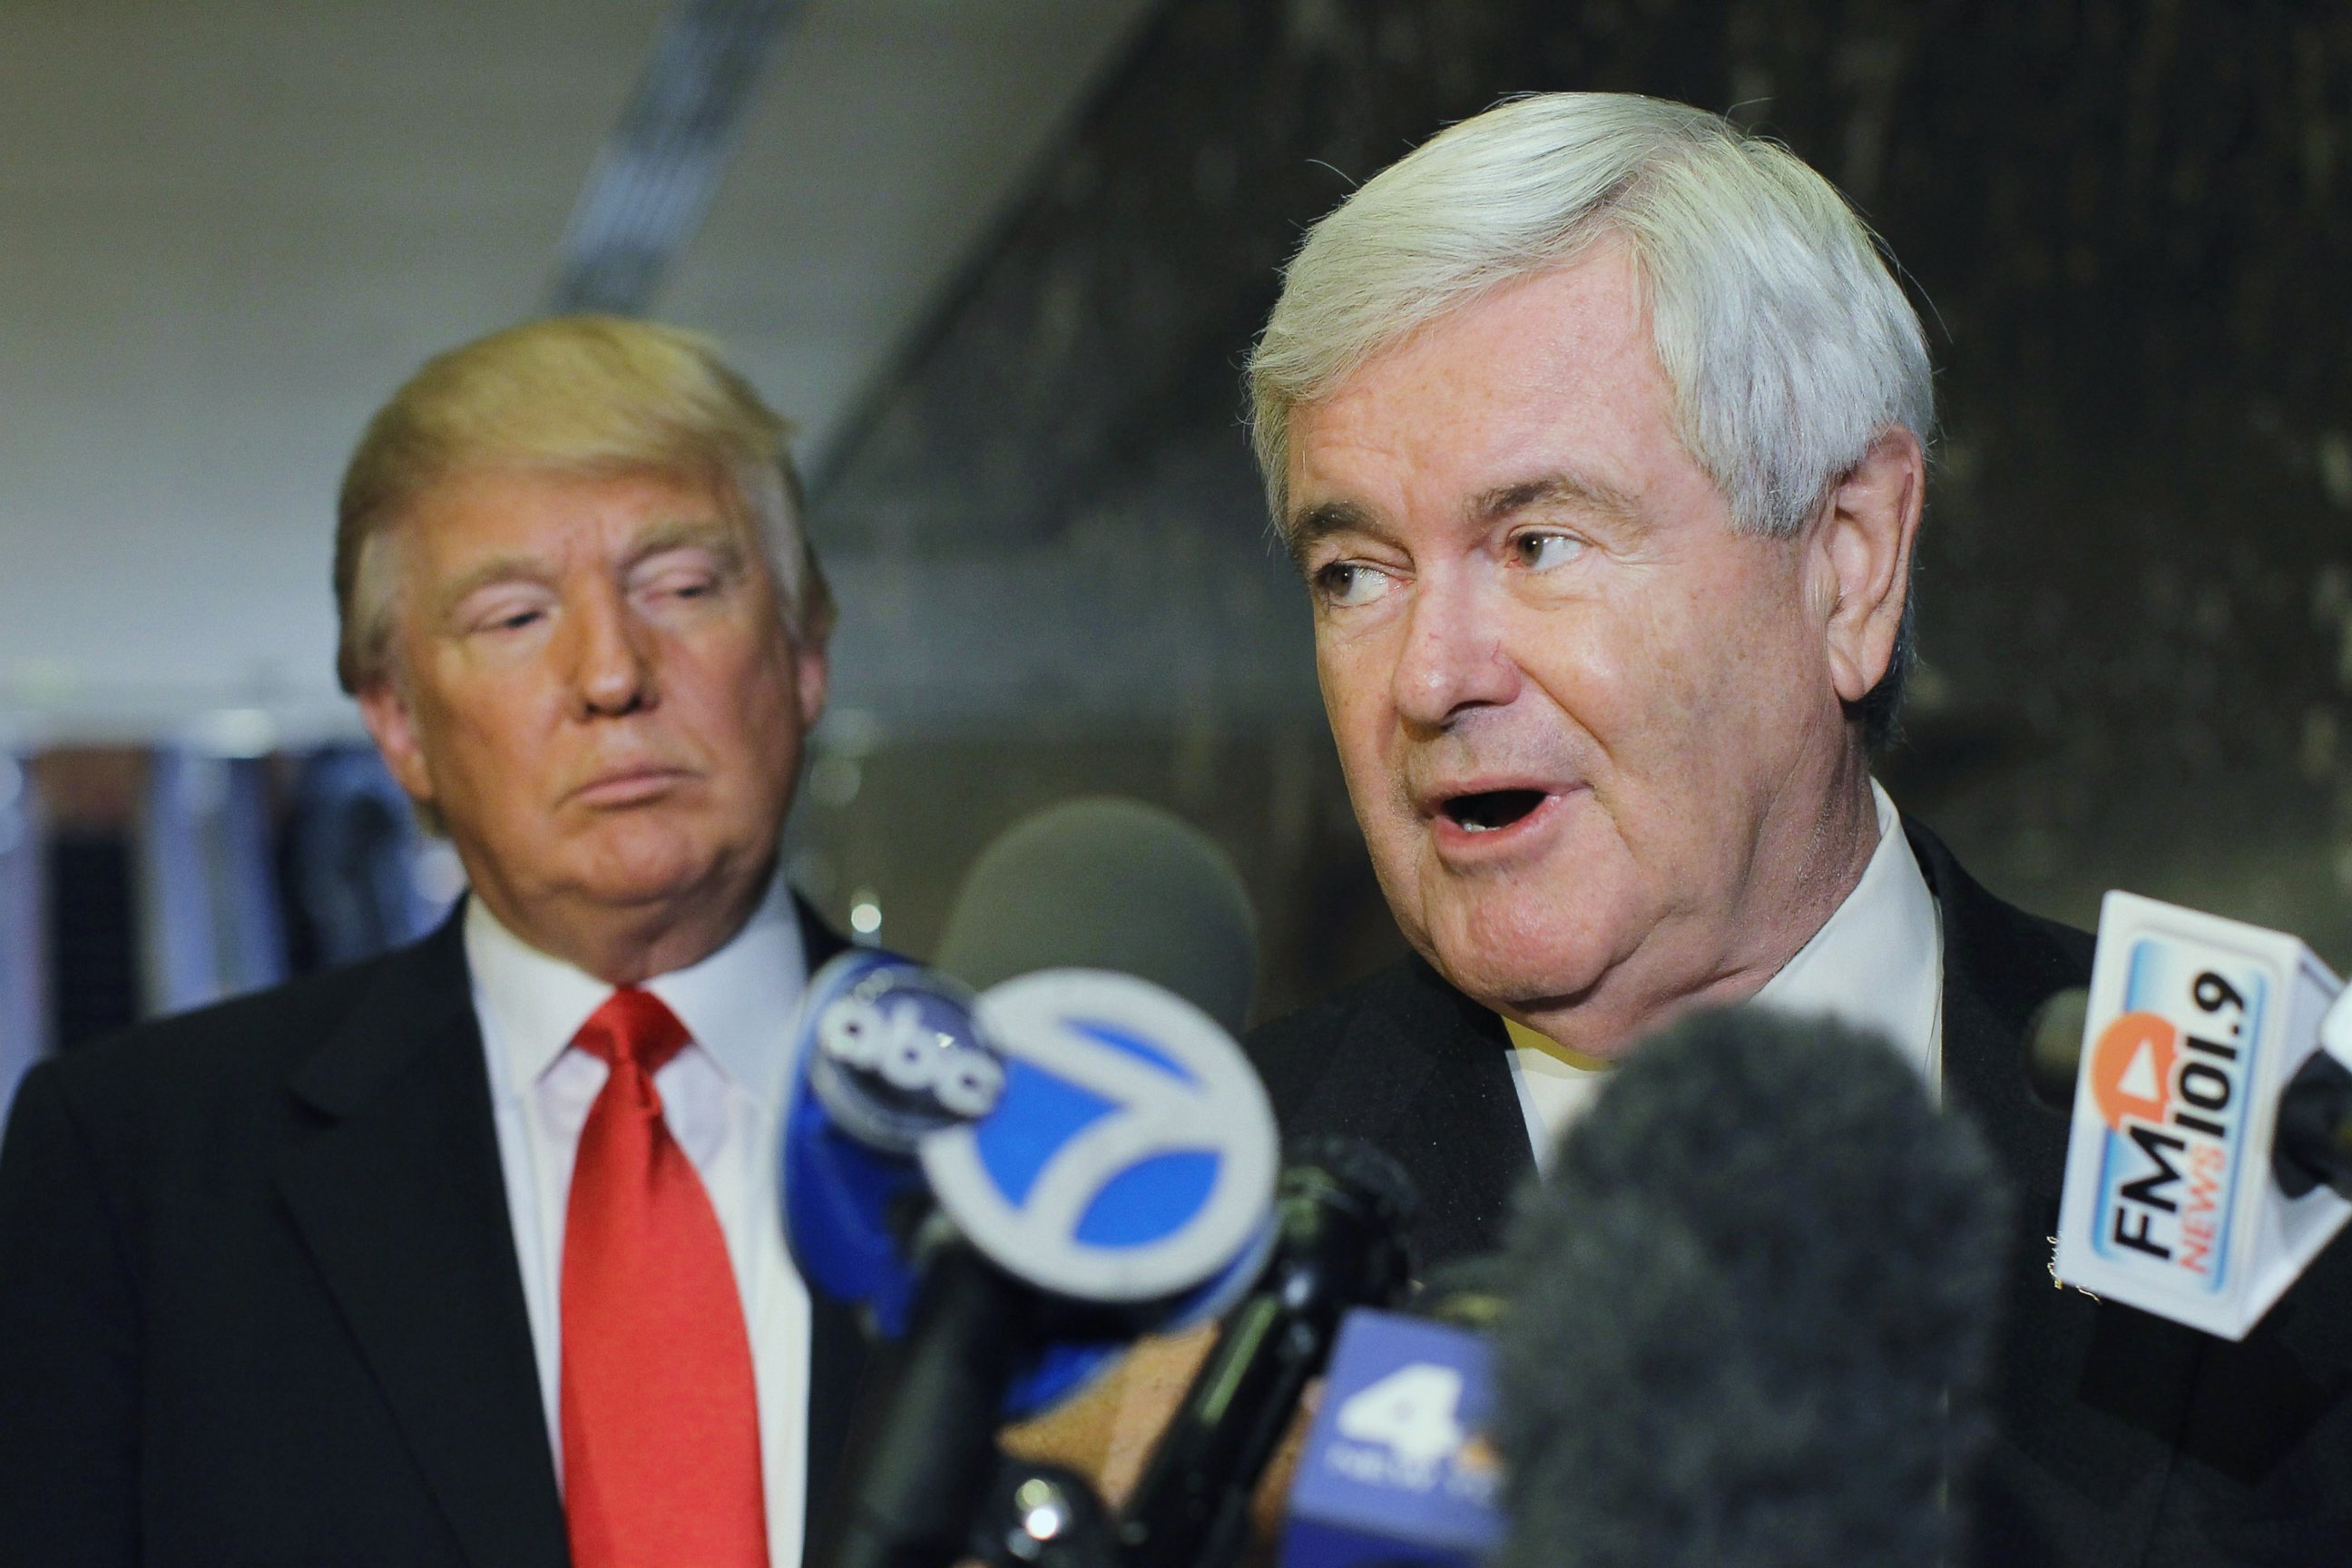 PHOTO: Newt Gingrich speaks to the media as Donald Trump listens at Trump Tower following a meeting between the two, Dec. 5, 2011, in New York.